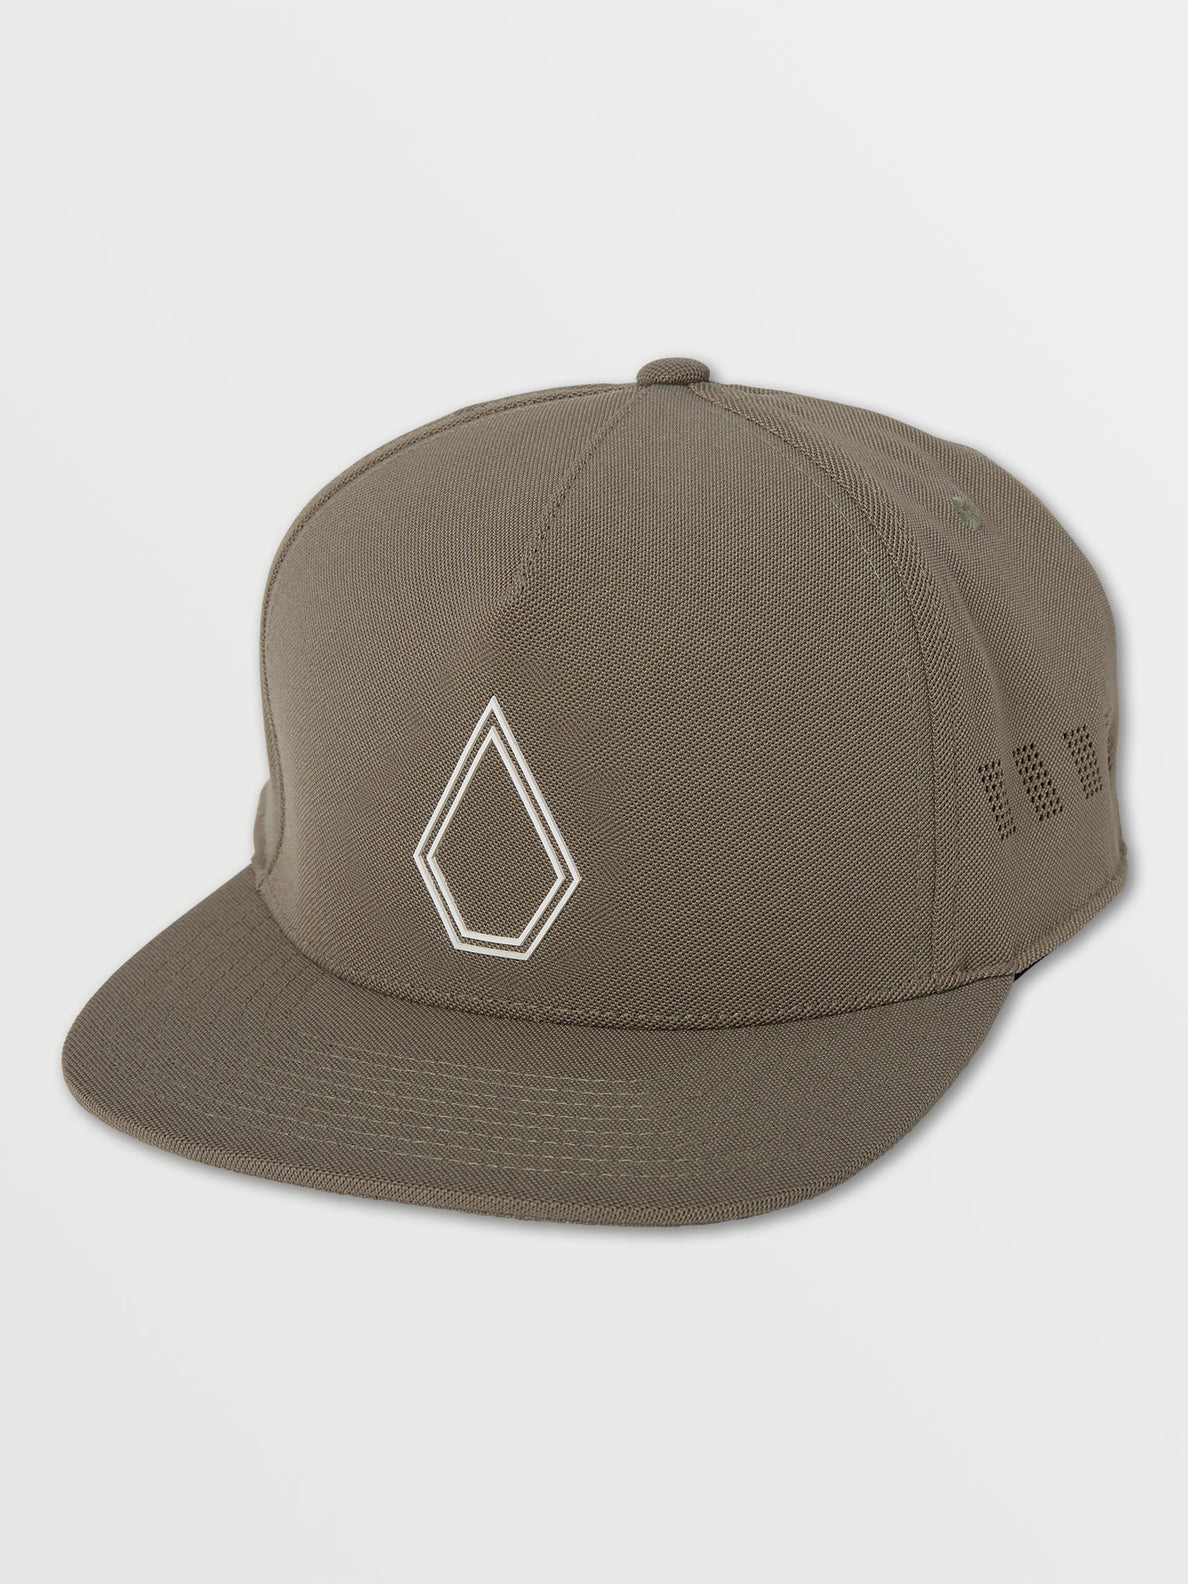 Whitmore 110 Snapback Hat - Army Green Combo (D5542100_ARC) [F]